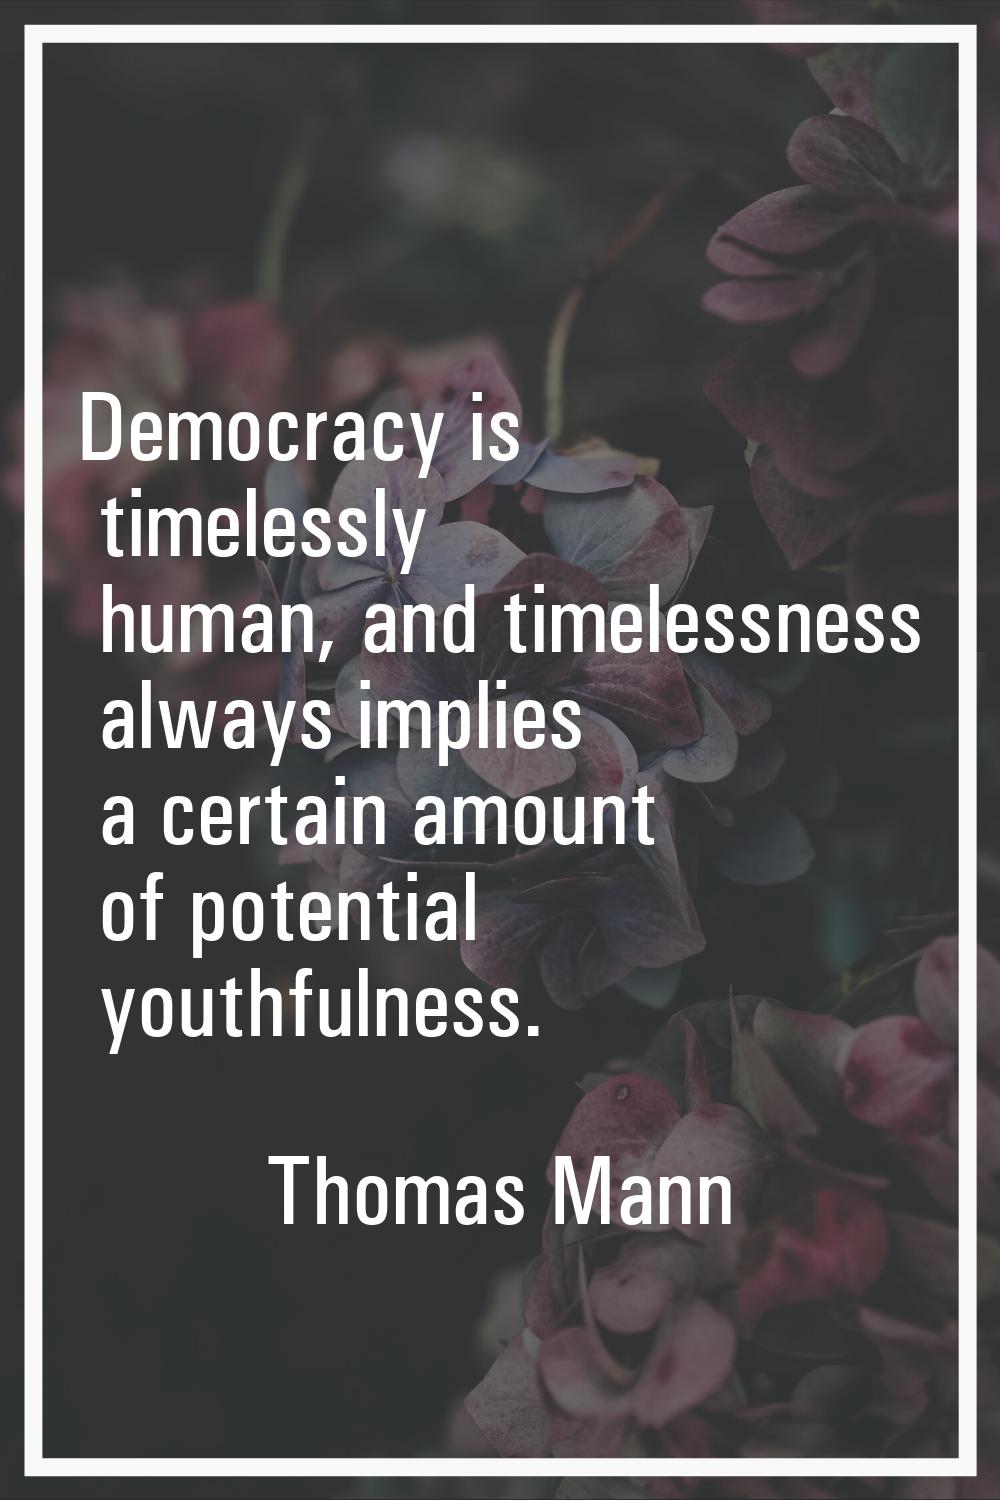 Democracy is timelessly human, and timelessness always implies a certain amount of potential youthf